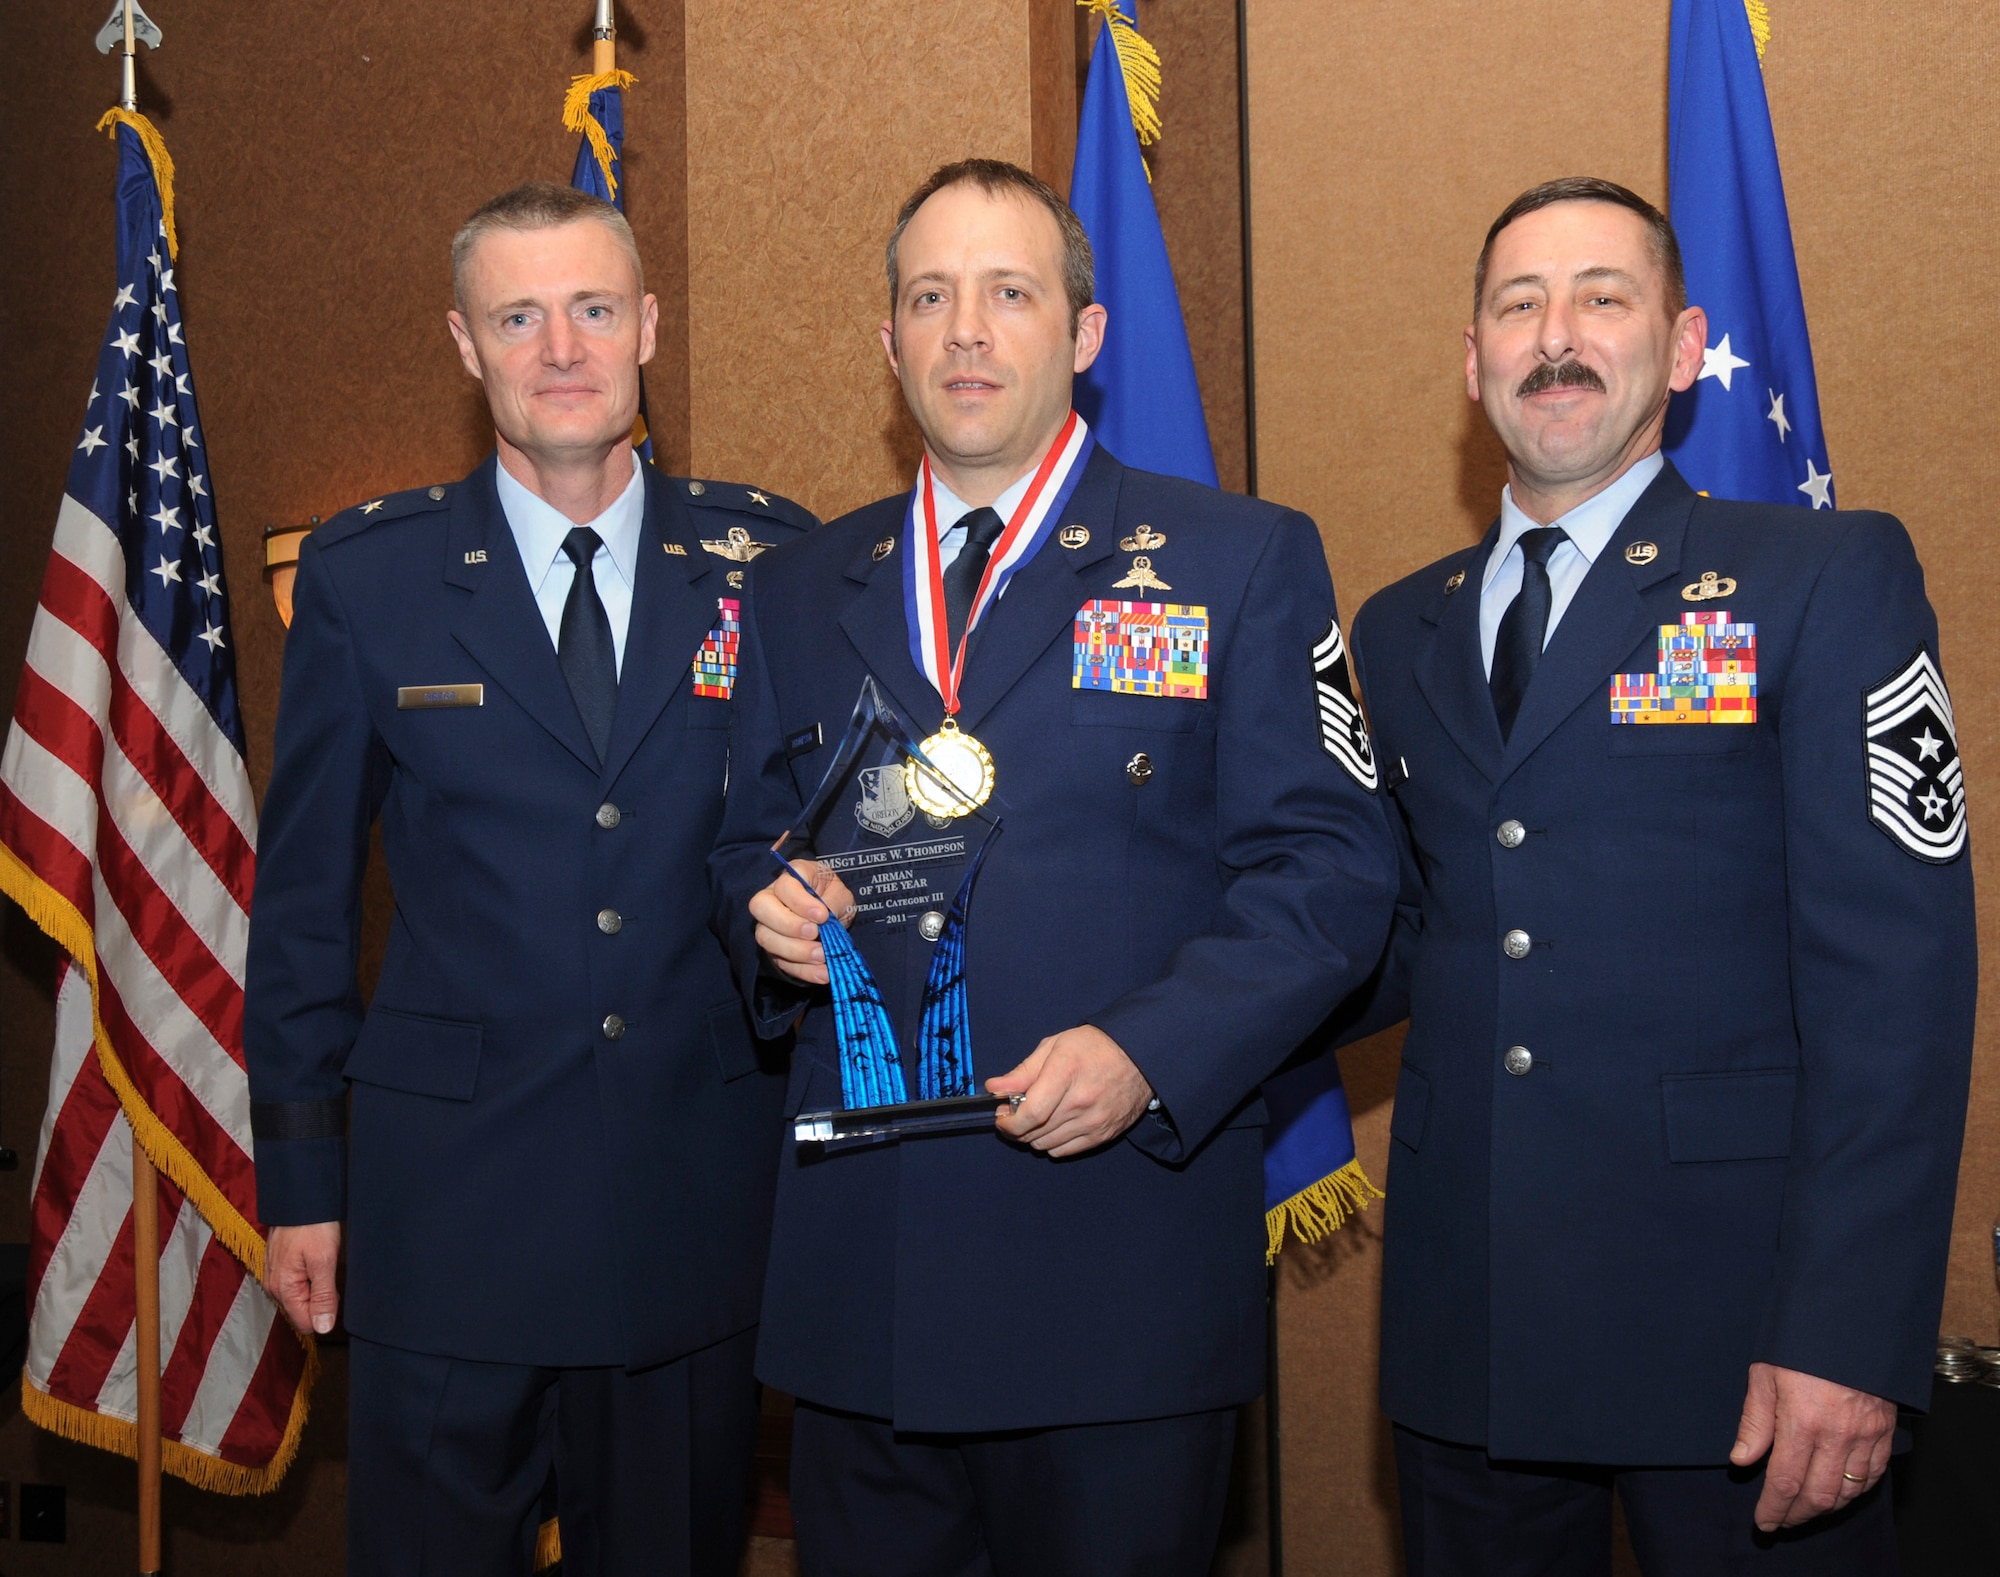 Oregon Air National Guard Commander Brig. General Steven Gregg (left) and Oregon State Air National Guard Command Chief Master Sgt. Mark Russell (far right) stand with Senior Master Sgt. Luke Thompson, who was selected Overall Category III Airman of the Year for the Oregon Air National Guard, during the 18th Annual Oregon Air National Guard Awards Banquet, held on February 25, 2012 in Portland, Ore., (US Air Force Photograph by Tech. Sgt. John Hughel, 142nd Fighter Wing Public Affairs)(Released)